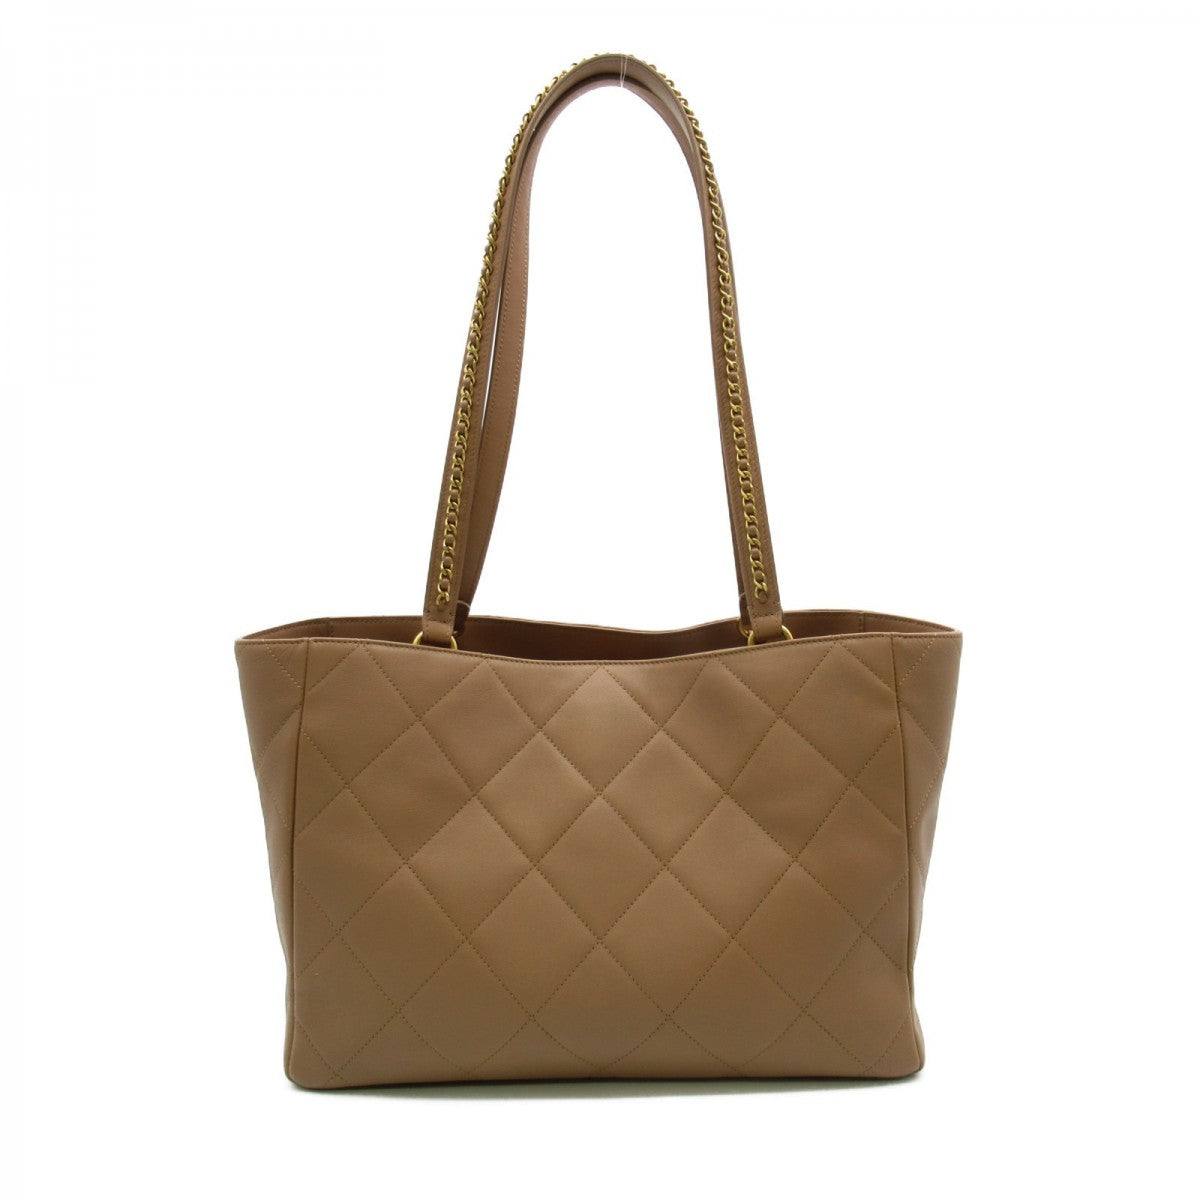 CC Quilted Leather Tote Bag